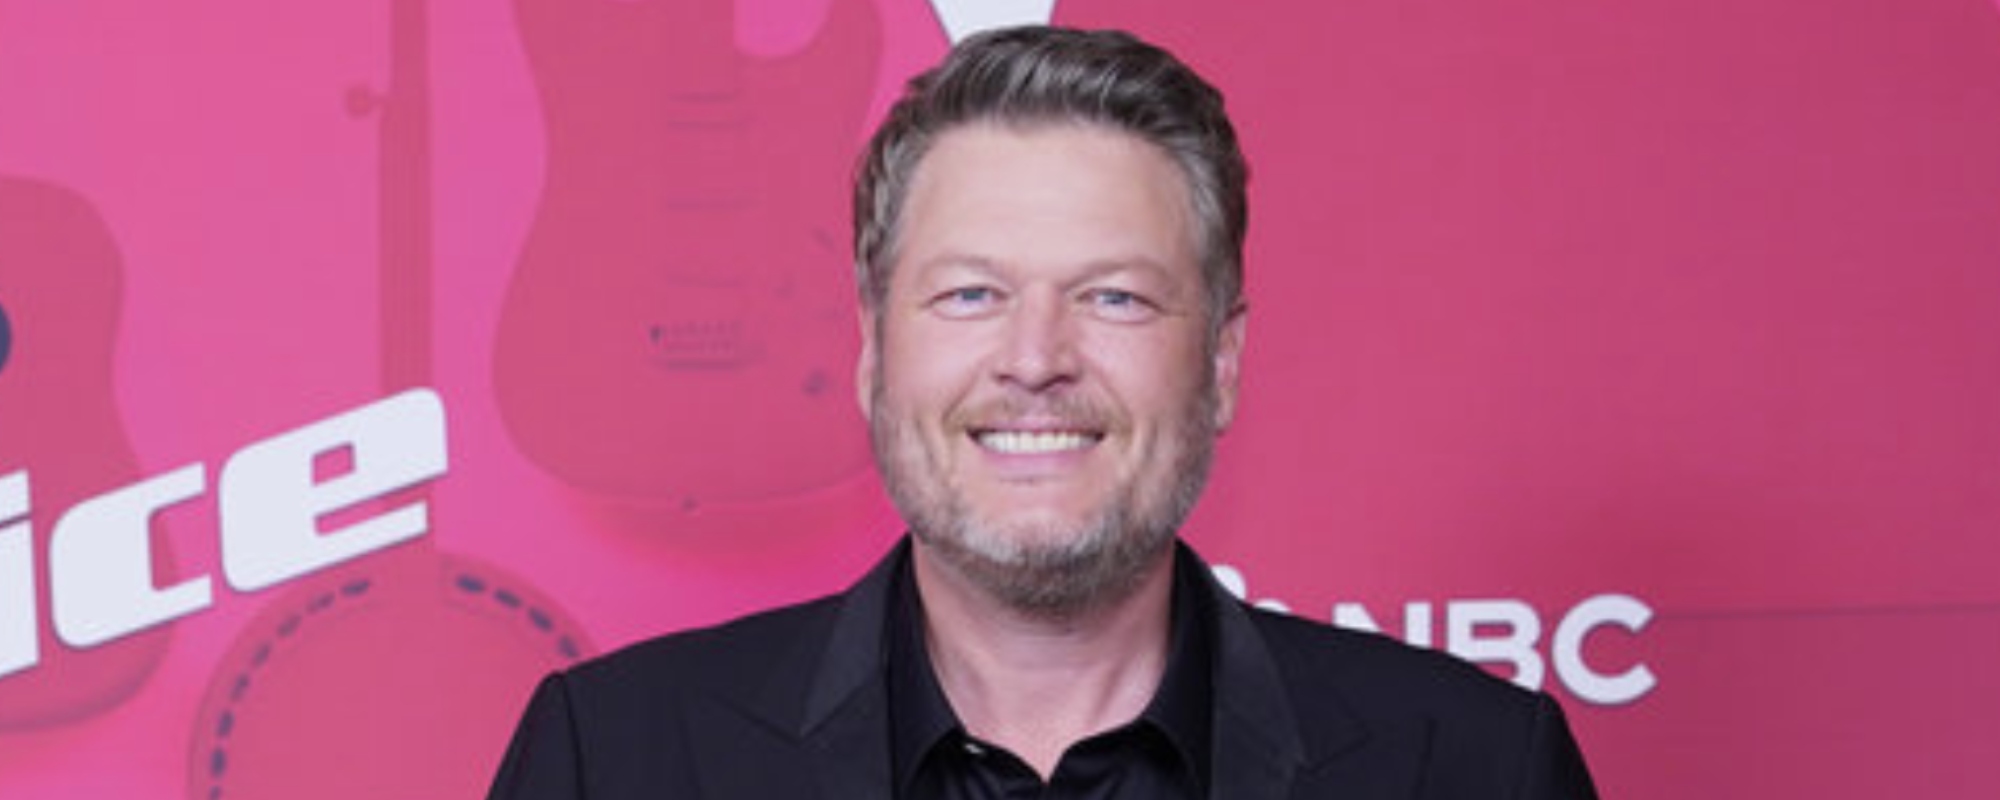 Blake Shelton Returns to ‘The Voice’ Season 25 Finale, Will He Be Returning as a Coach in Season 26?